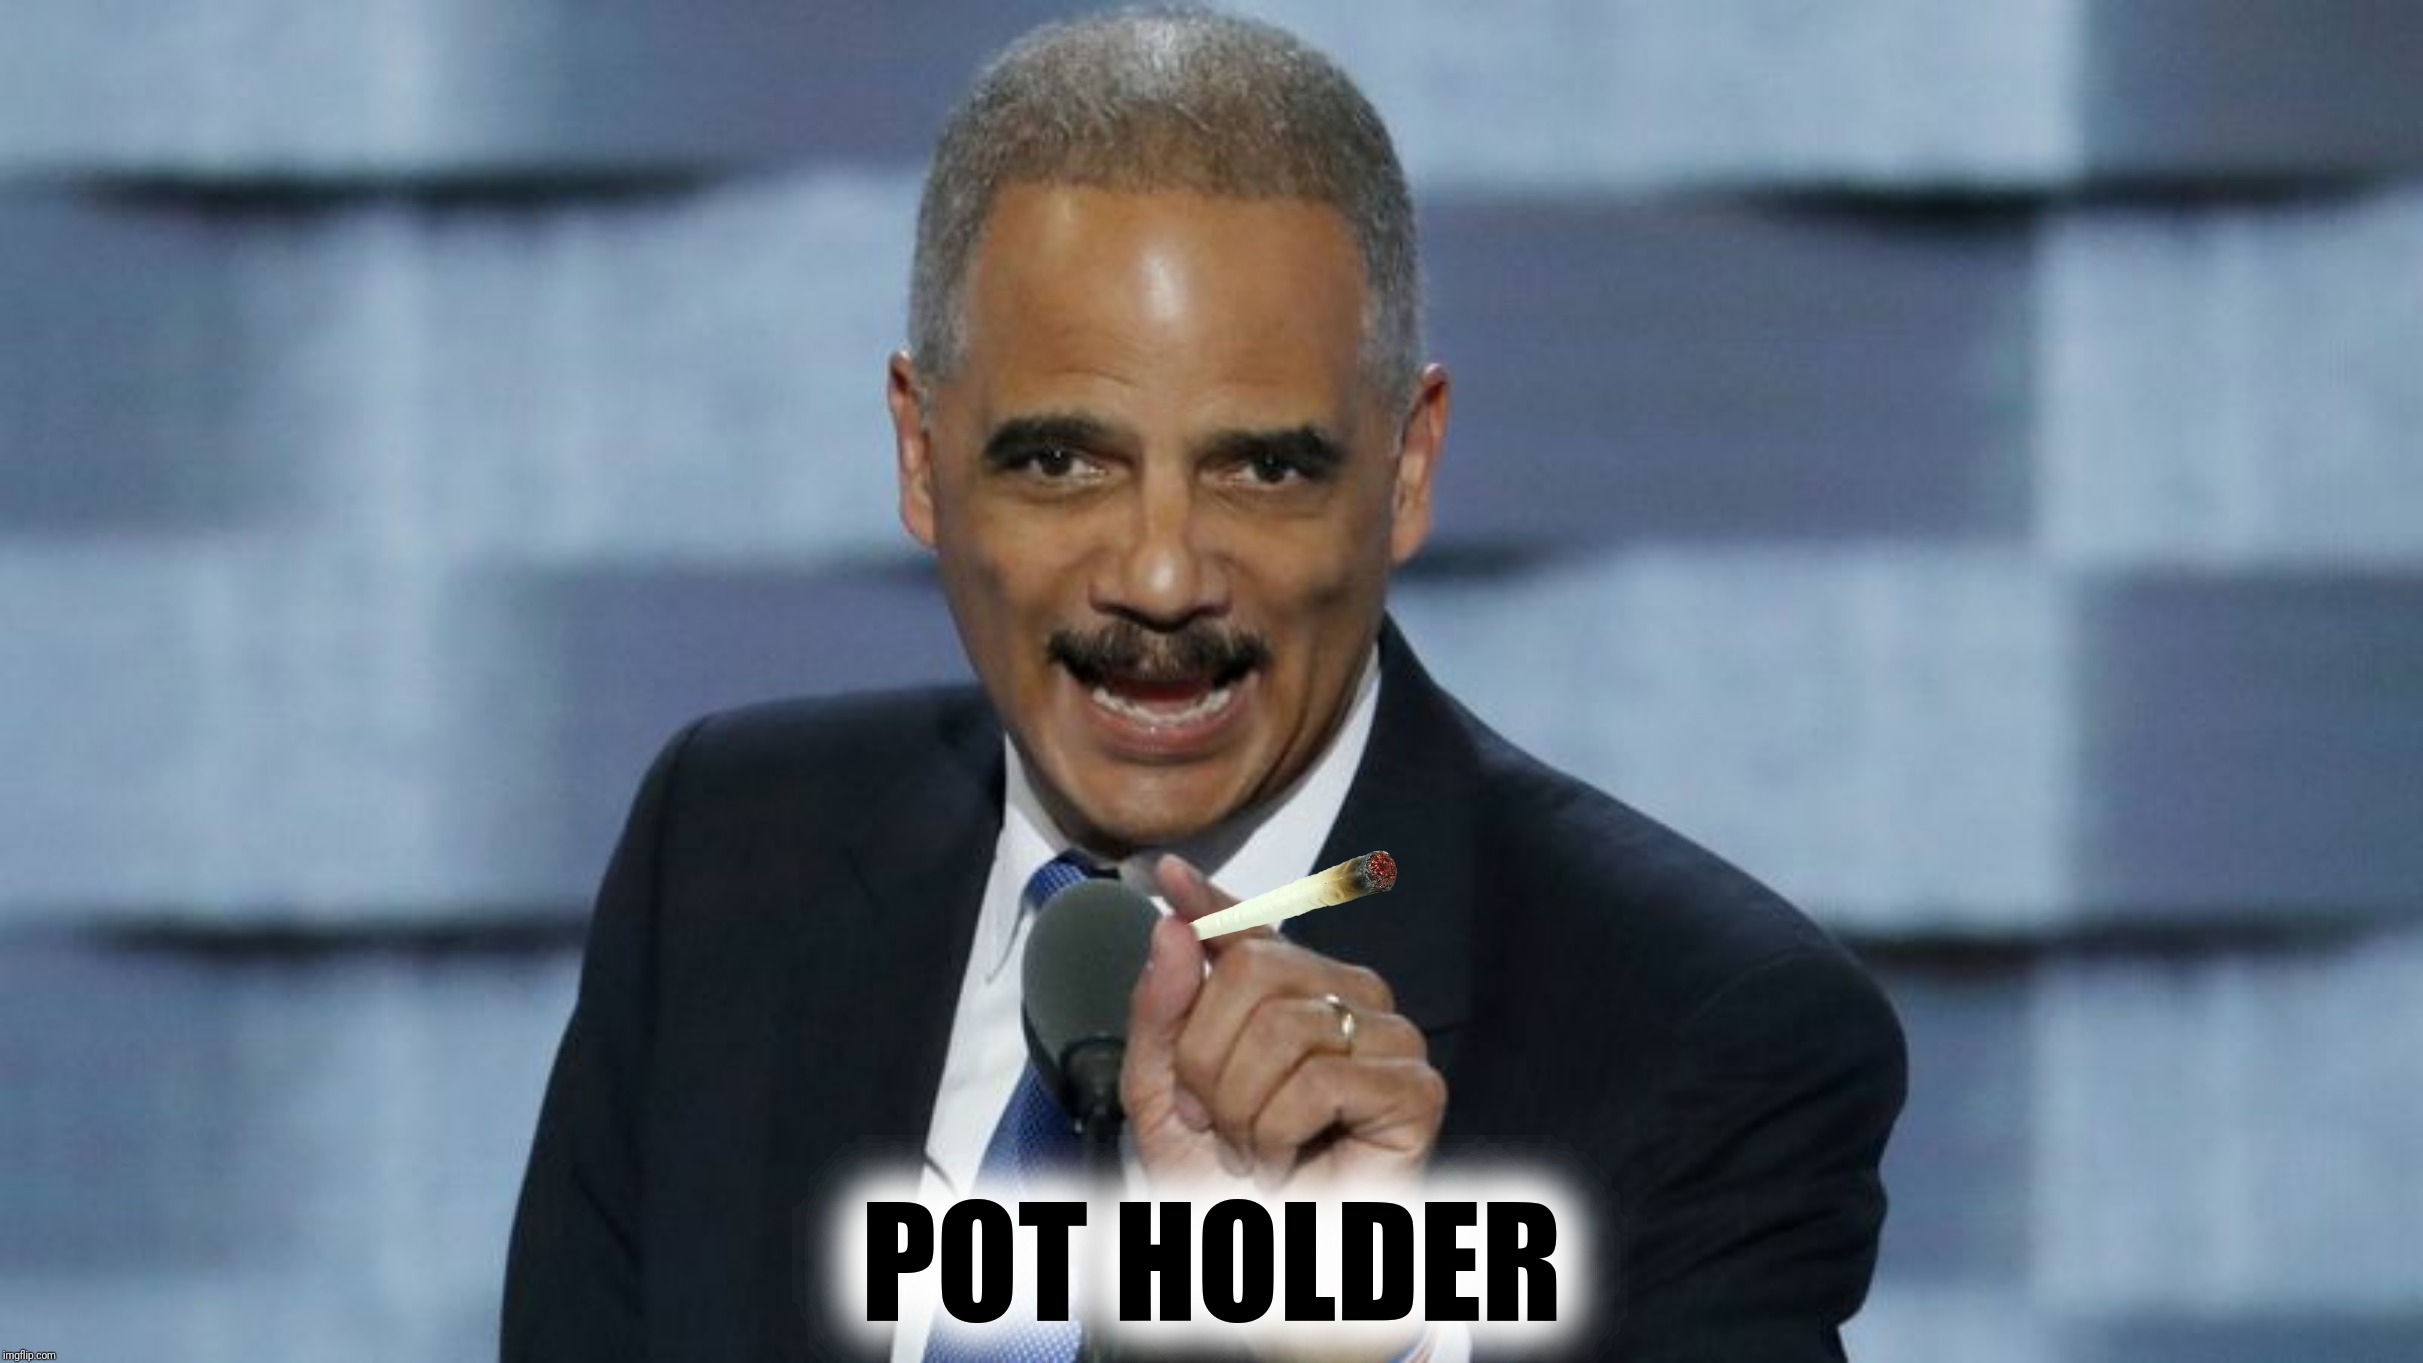 Bad Photoshop Sunday presents:  The face you make when you trade firearms for some killer bud | POT HOLDER | image tagged in bad photoshop sunday,eric holder,pot,joint,fast and furious | made w/ Imgflip meme maker